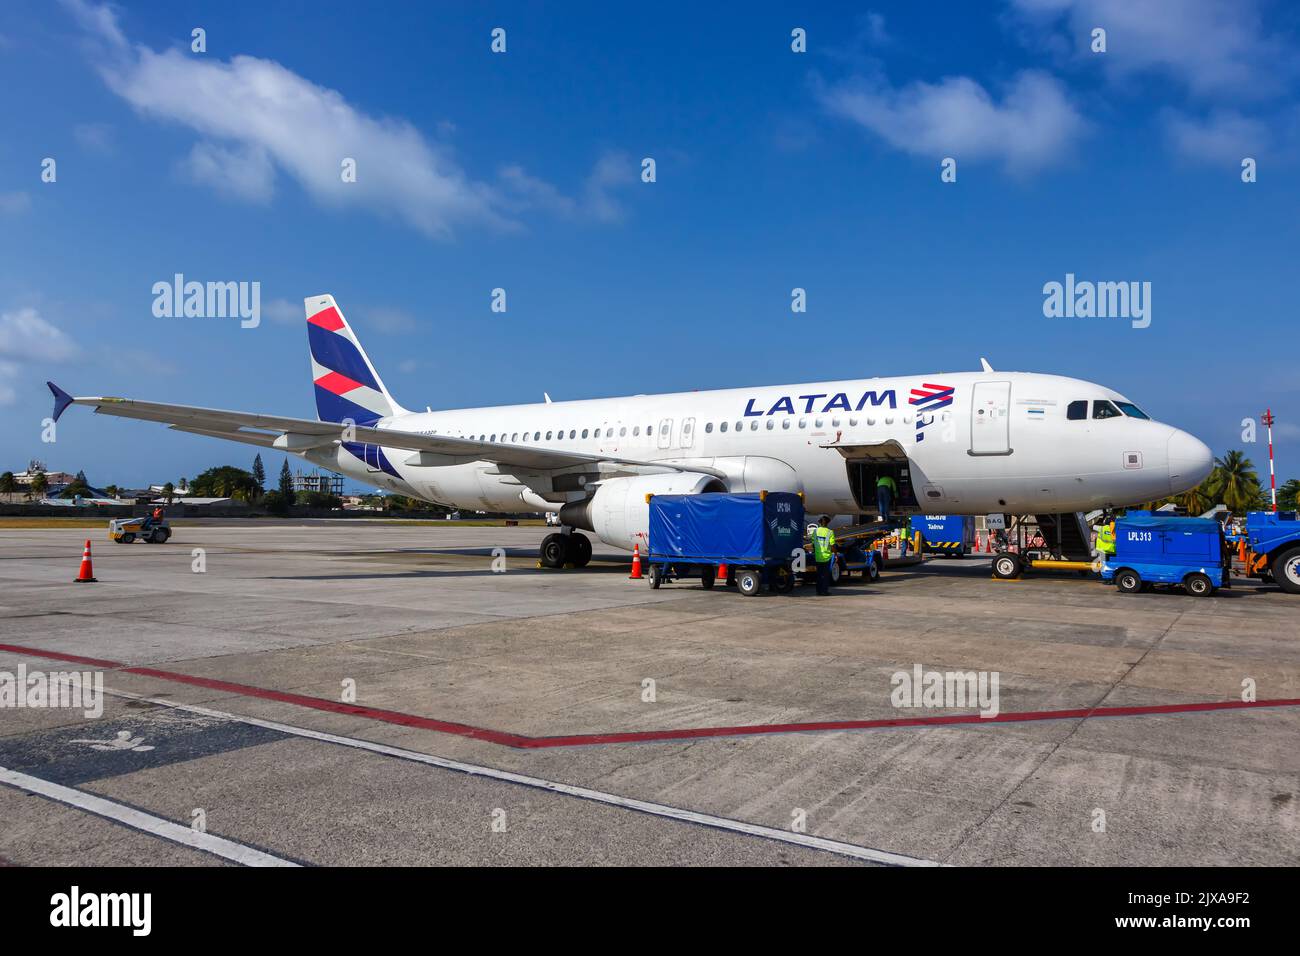 San Andres, Colombia - April 6, 2022: LATAM Airlines Airbus A320 airplane at San Andres (ADZ) airport in Colombia. Stock Photo